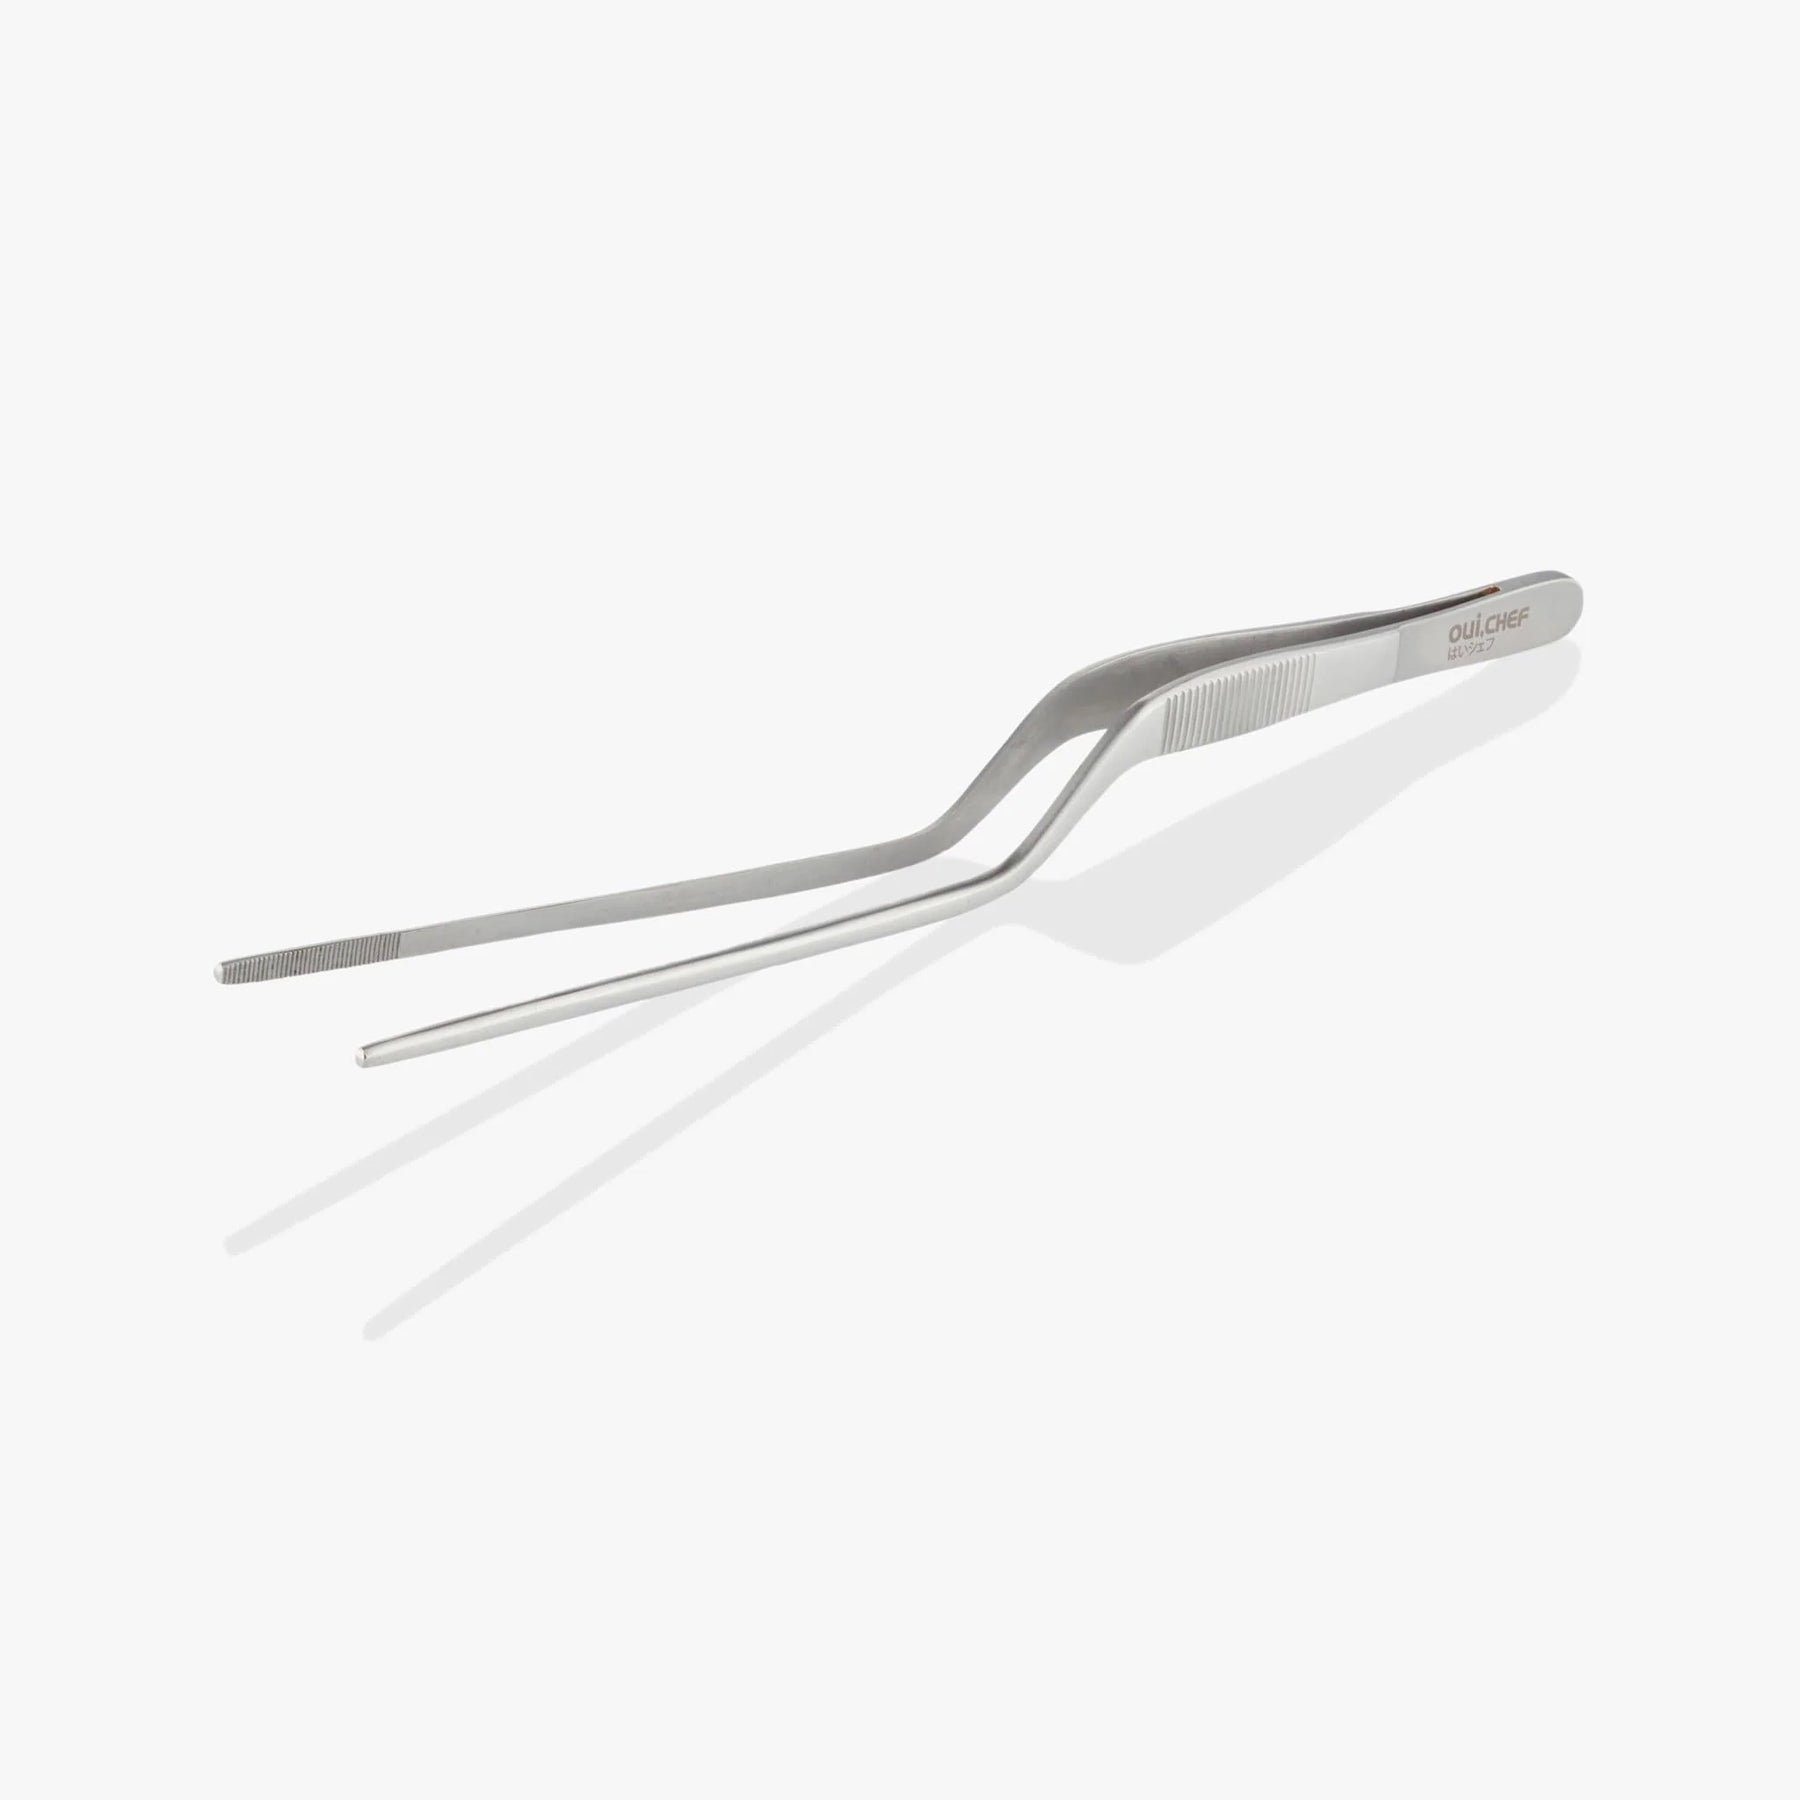 oui chef cooking kitchen tweezers stainless steel 20cm offset